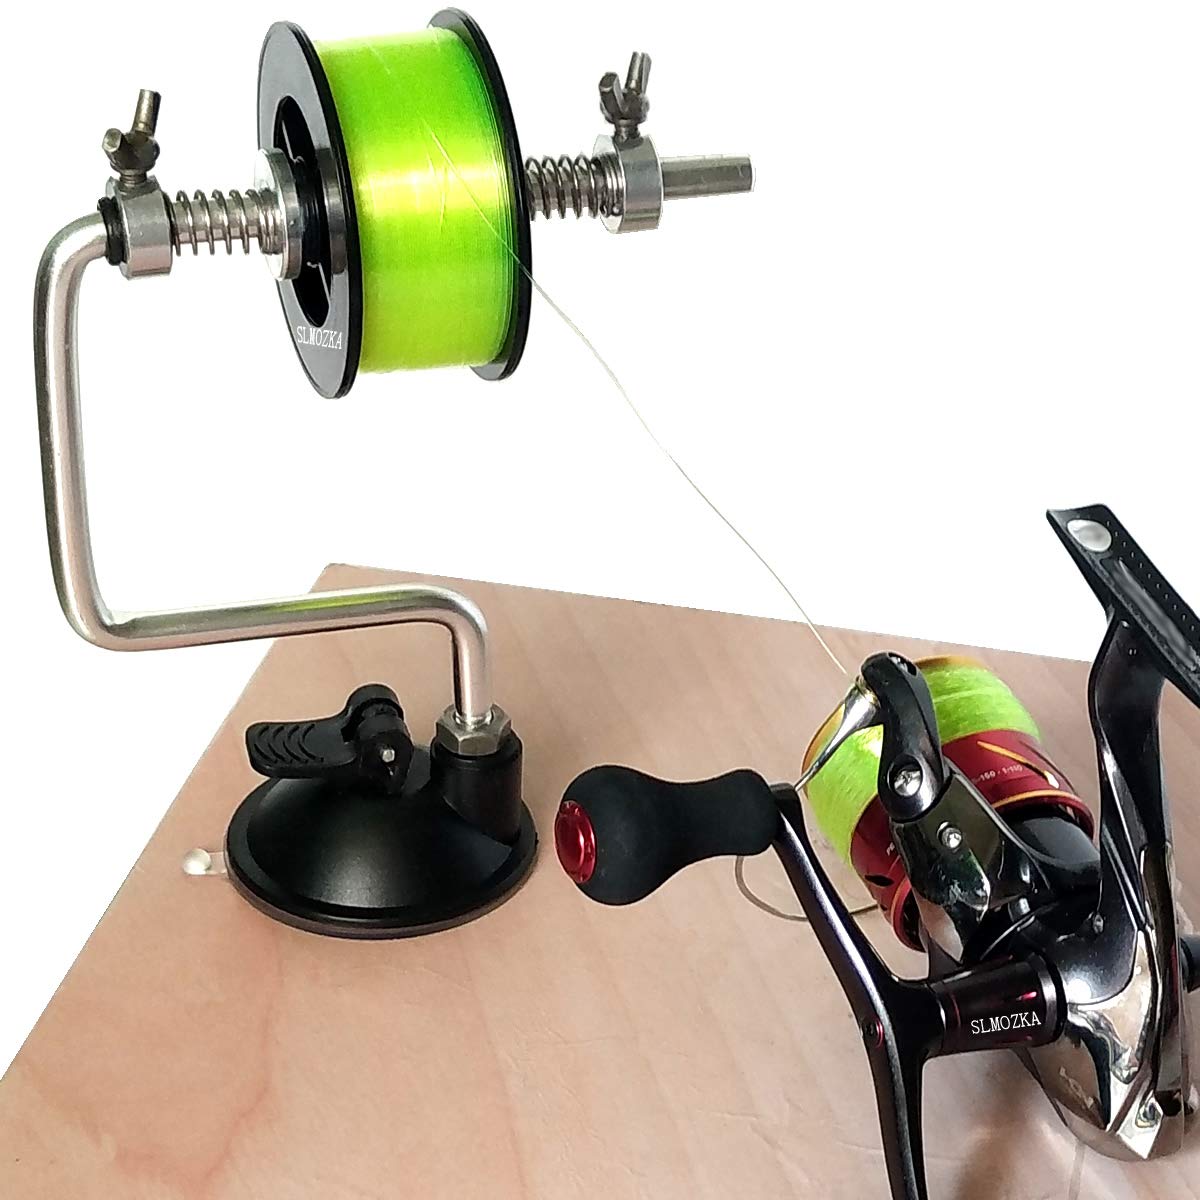 SLMOZKA Fishing Line Spooler Silver Reel Winder Spool Tackle Winder  spooling Station Winding System Ultimate Line A-With Suction Cup